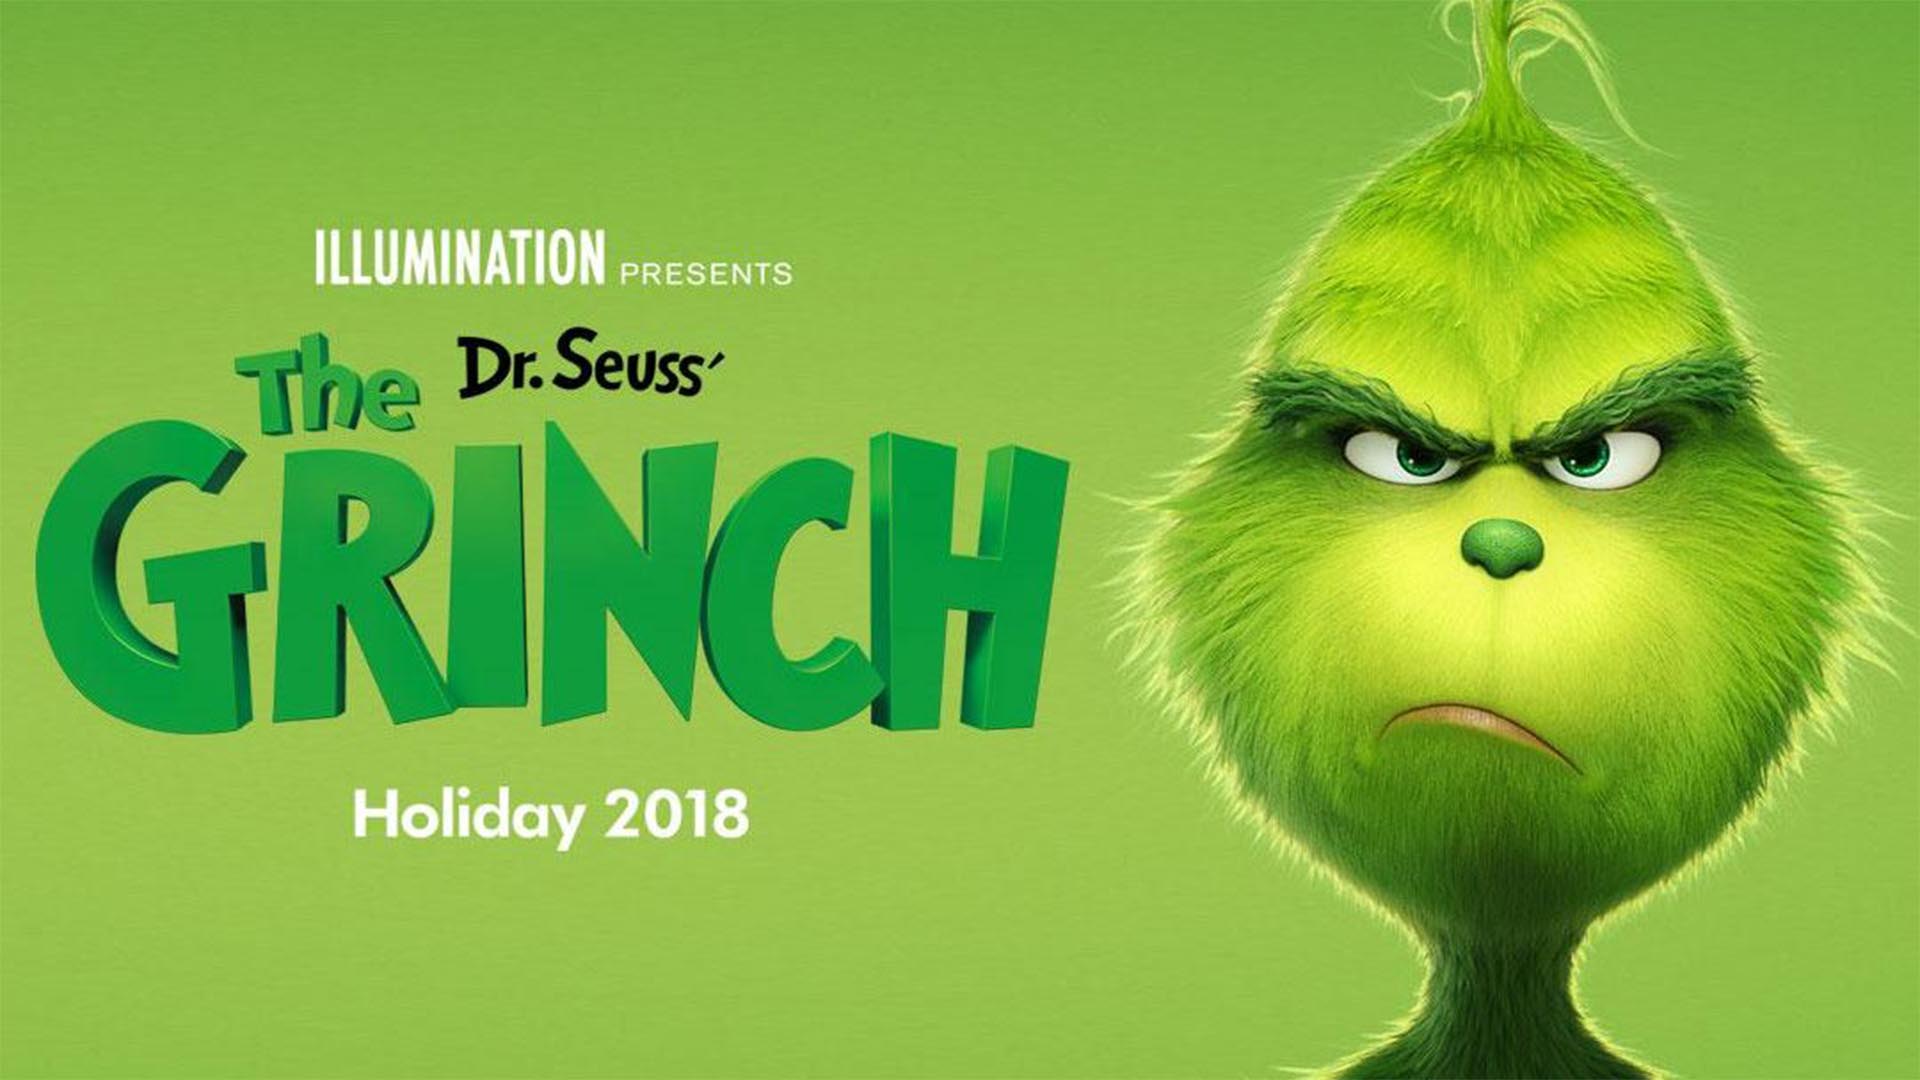 Who Did It Better?: How The Grinch Stole Christmas - Big Picture Film Club